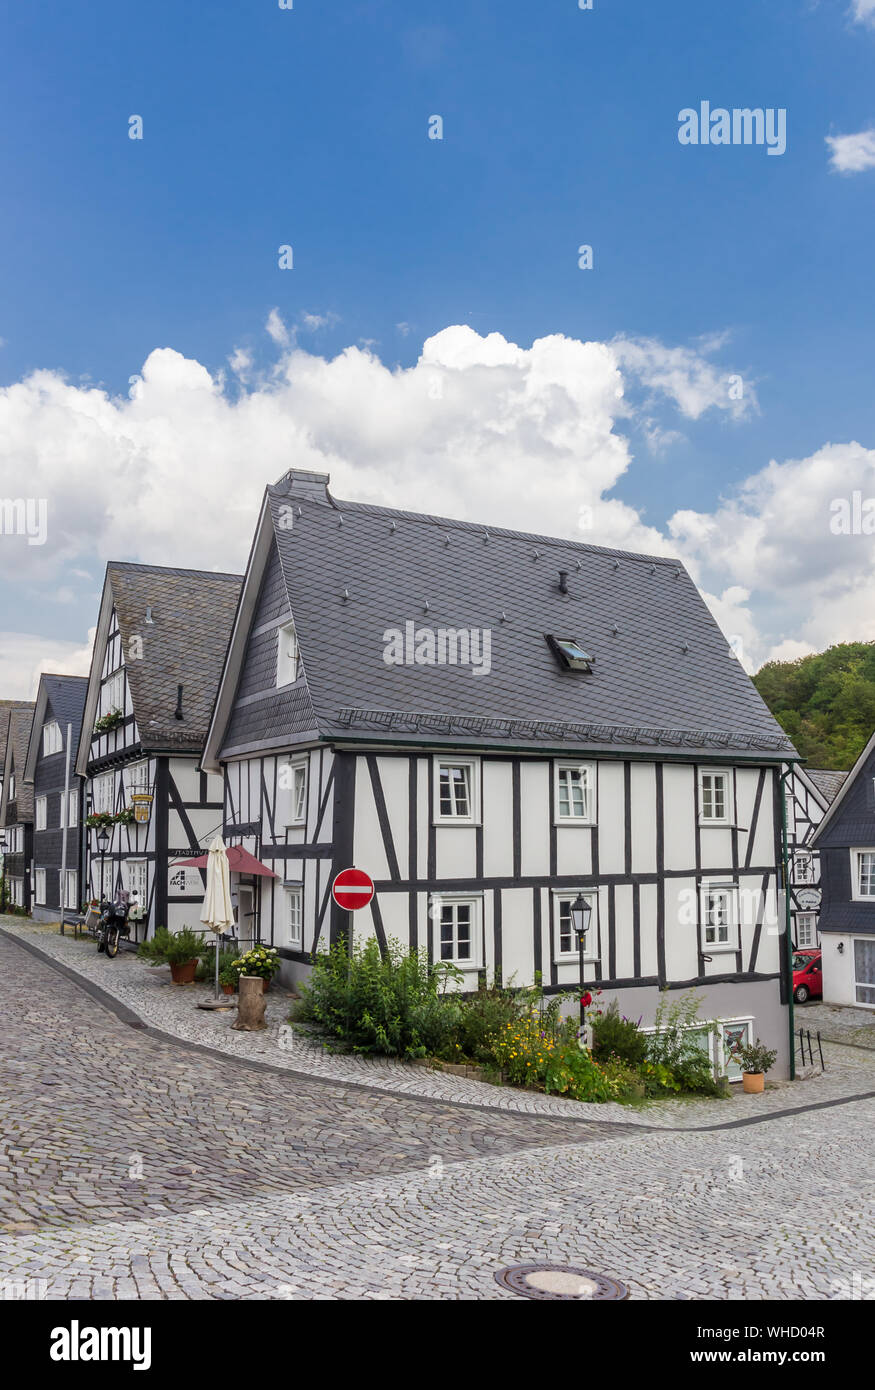 Cobblestoned street with half timbered houses in Freudenberg, Germany Stock Photo